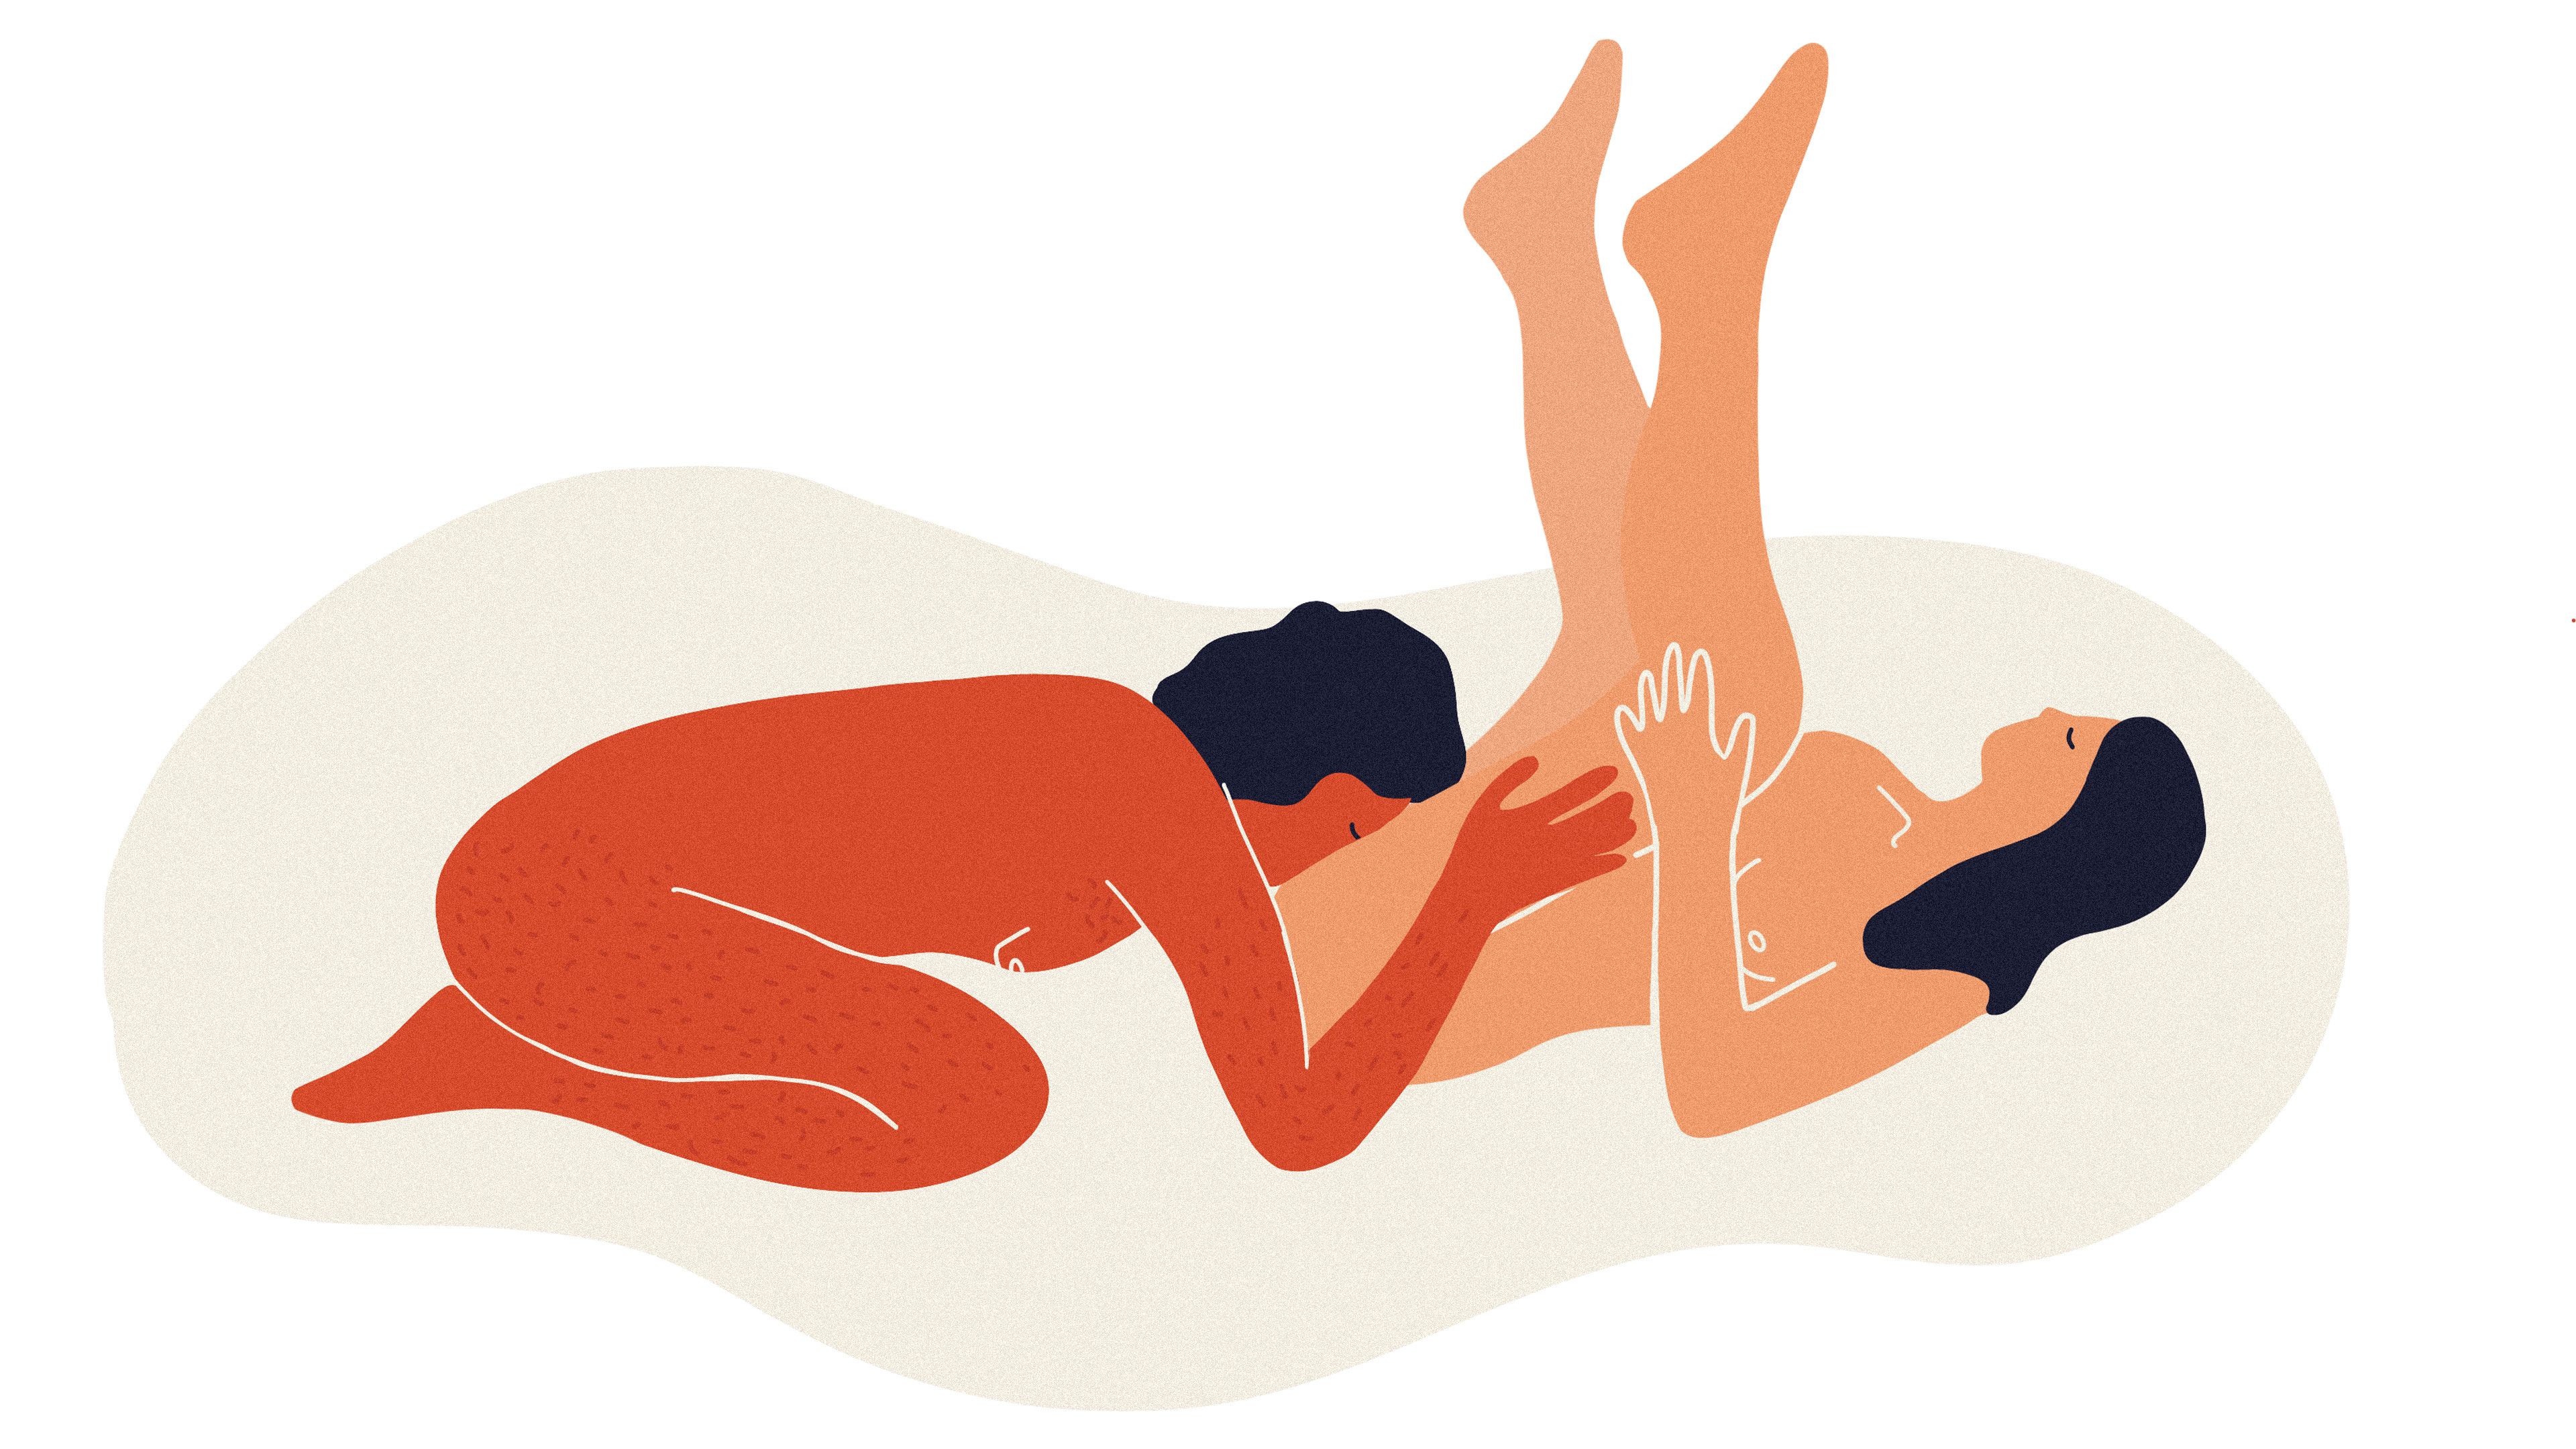 Best position to eat a girl out